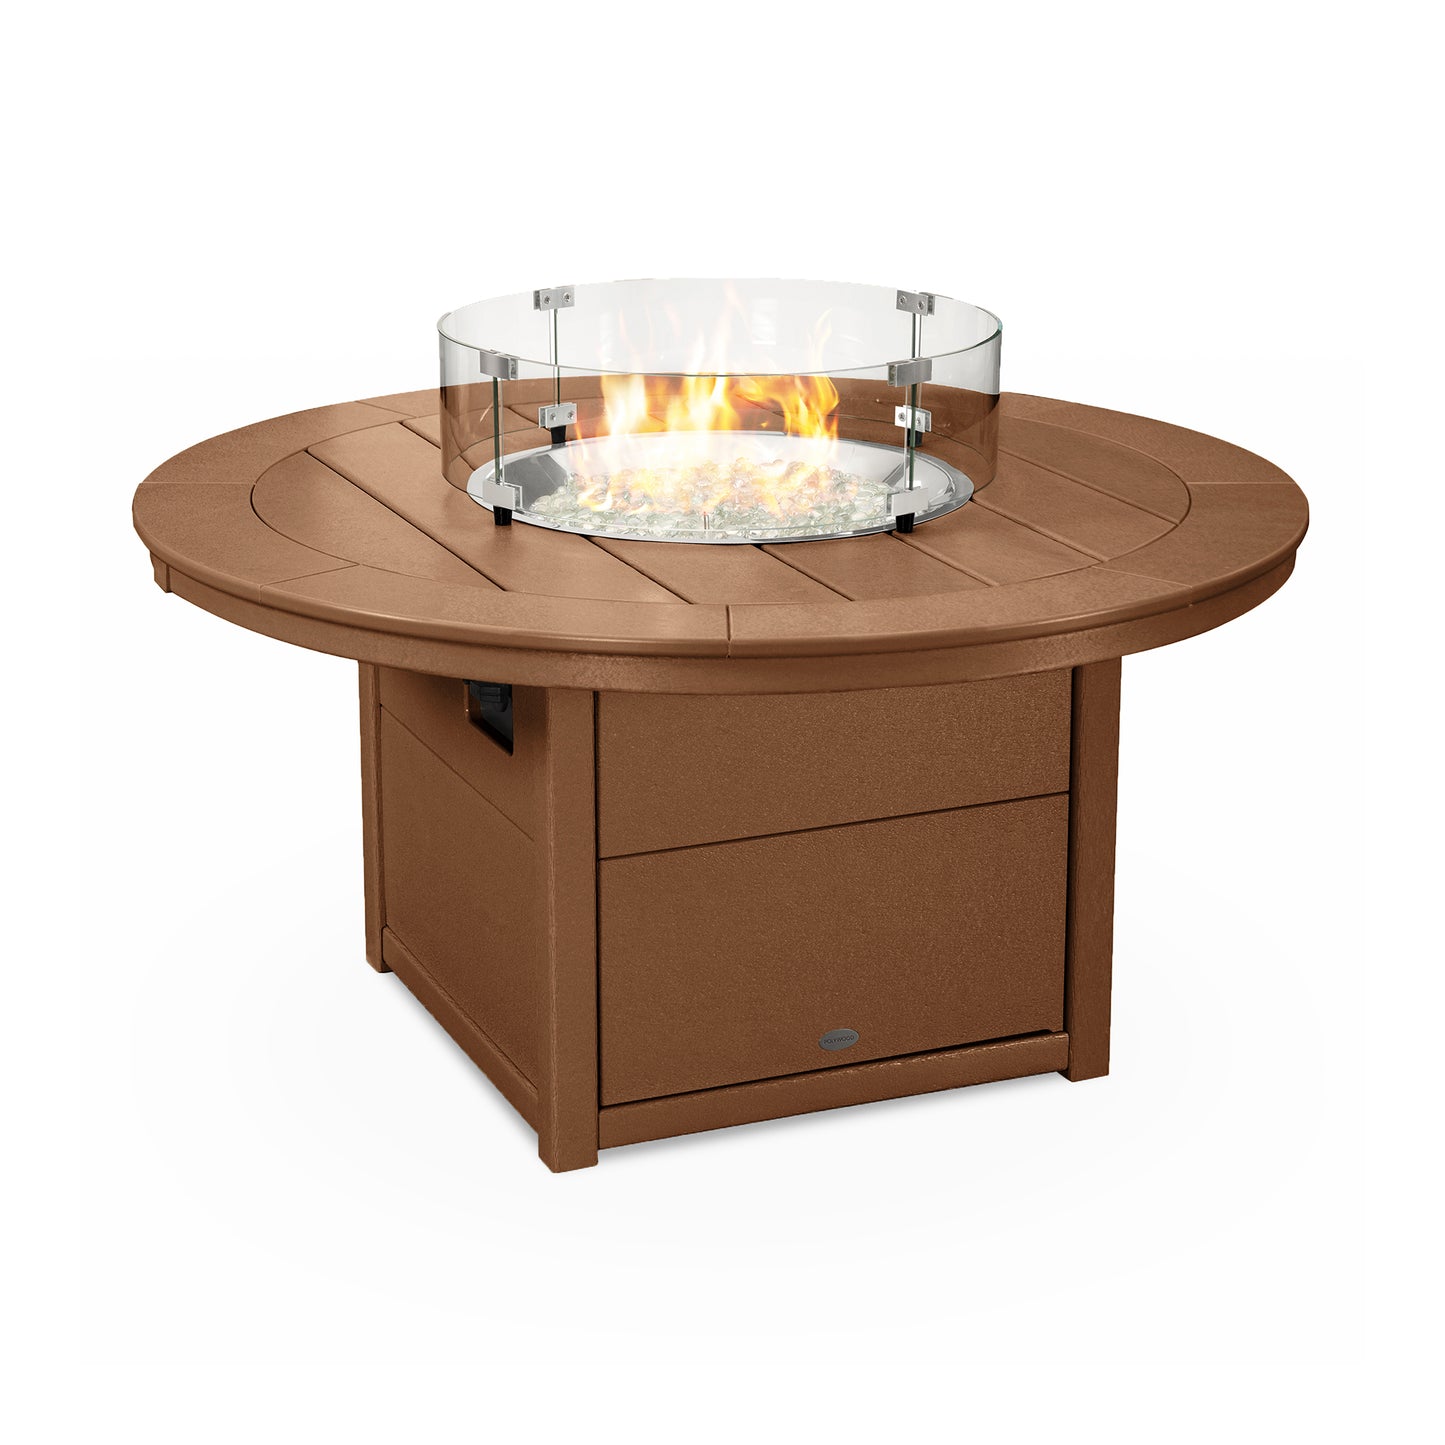 A POLYWOOD Round 48" Fire Pit Table featuring a glass top.